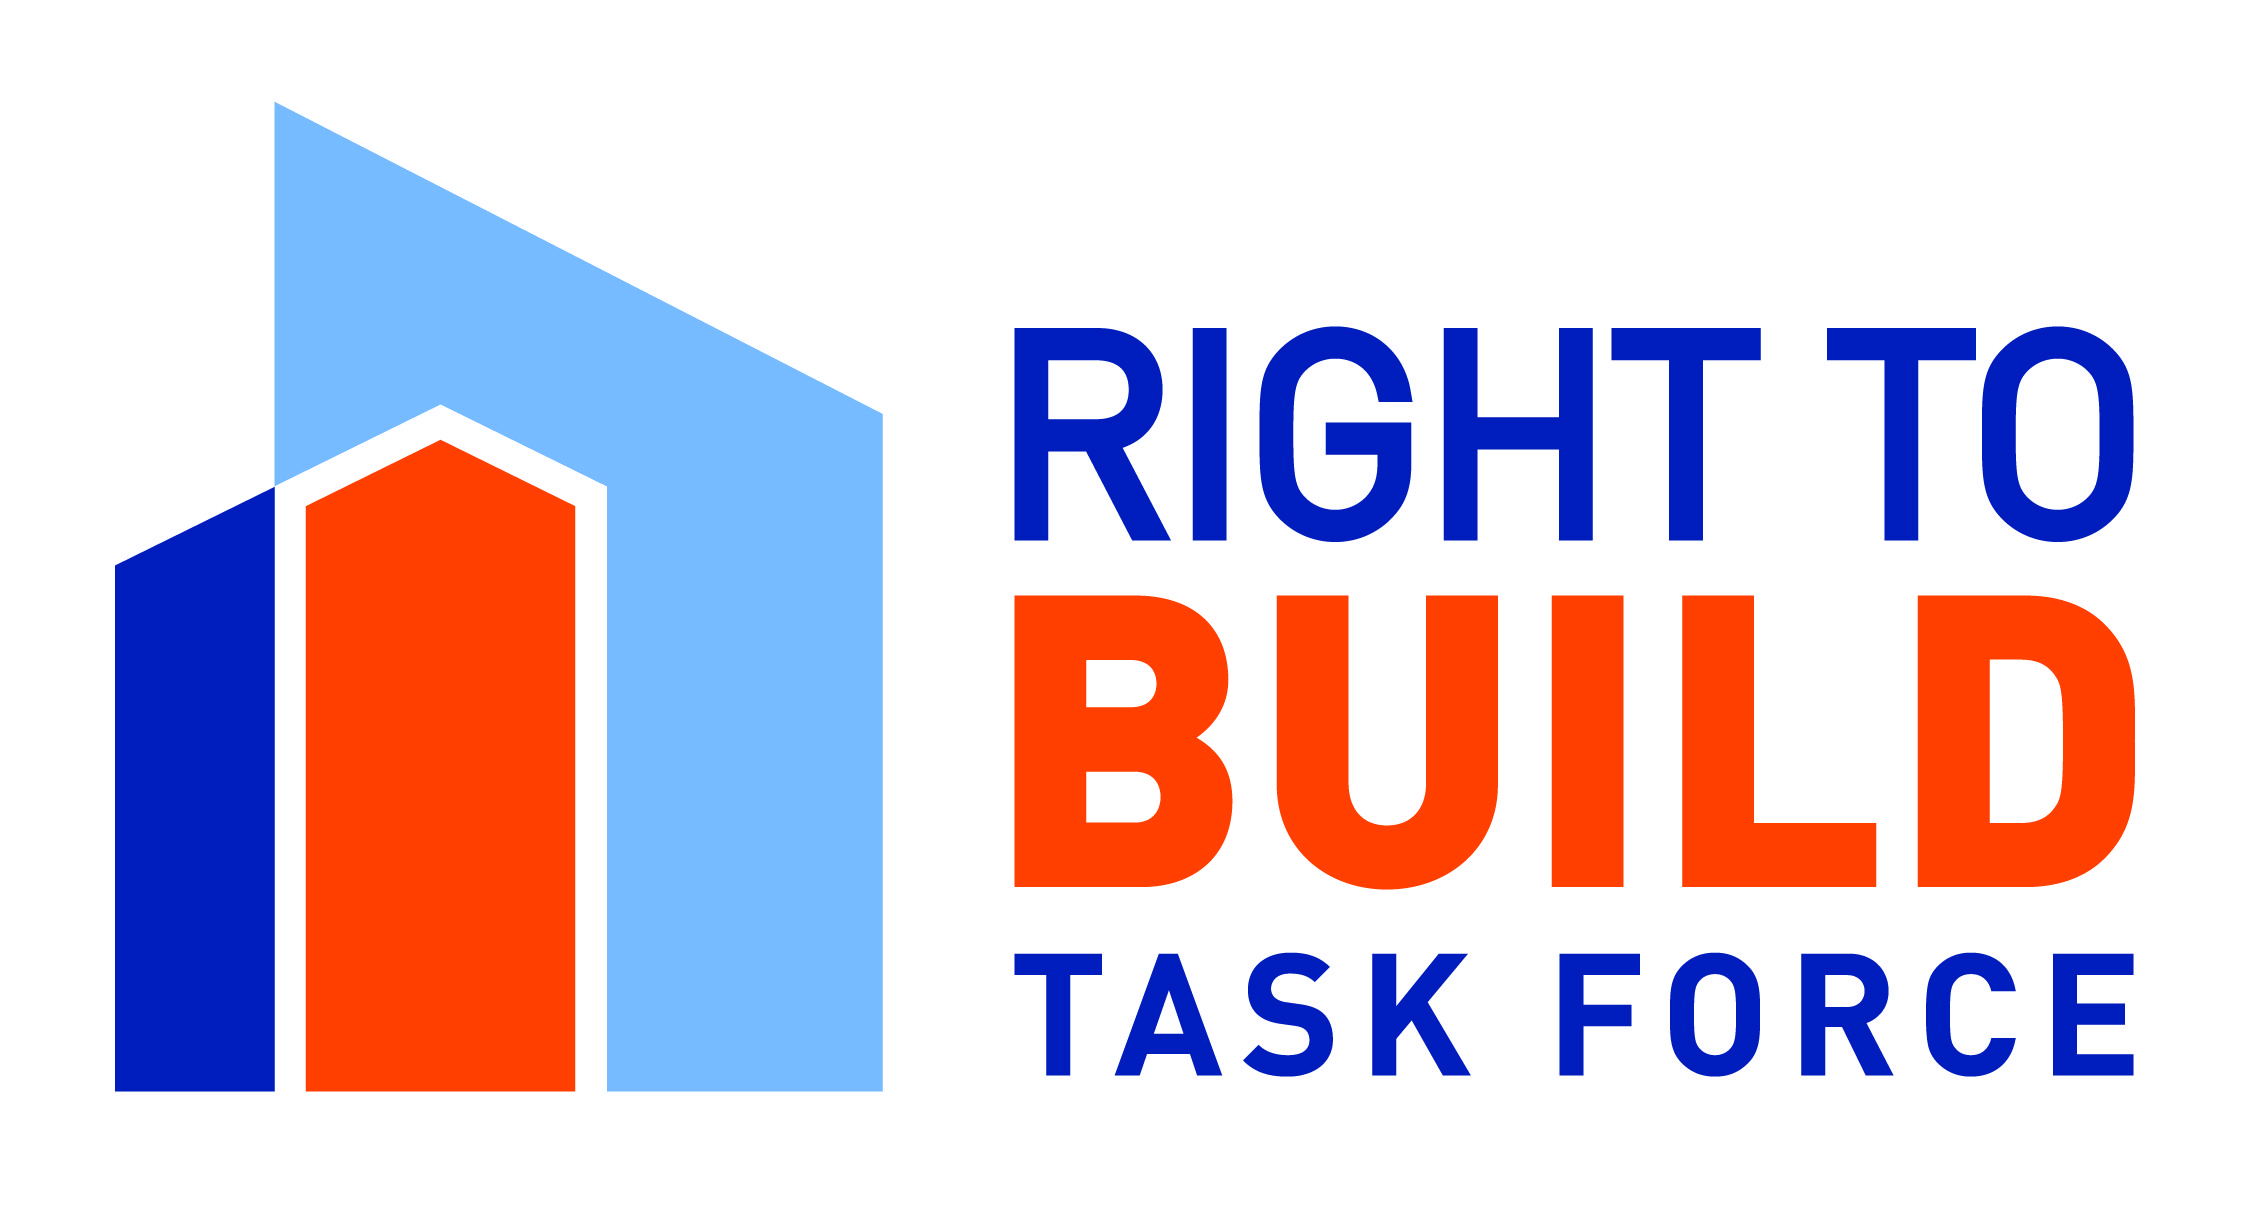 Right to Build Task Force